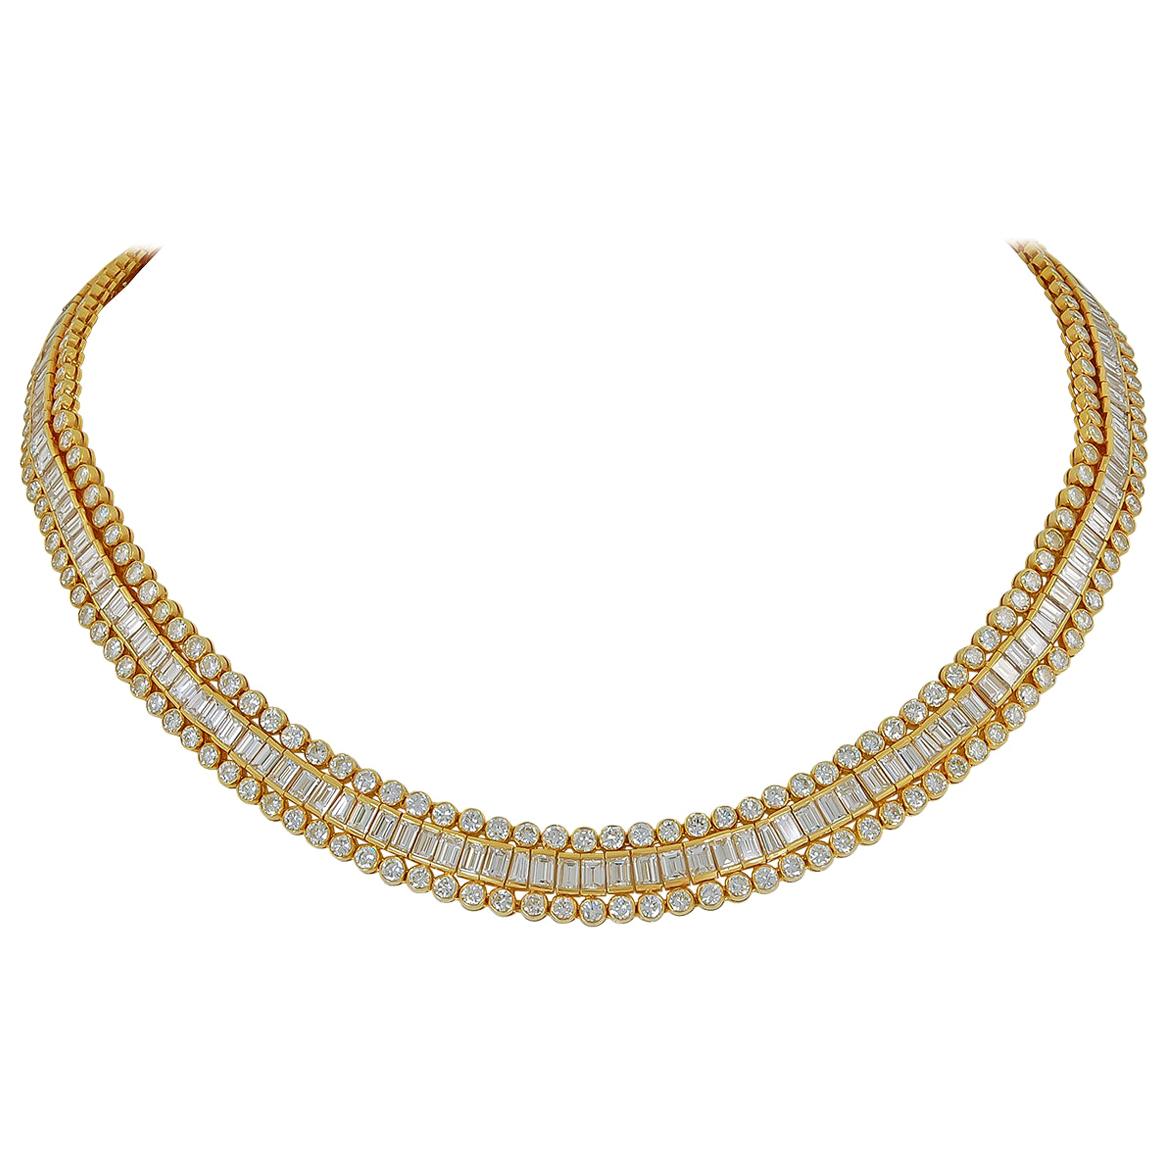 Cartier Tapered, Baguette, Round Diamond Necklace, 38 Carat